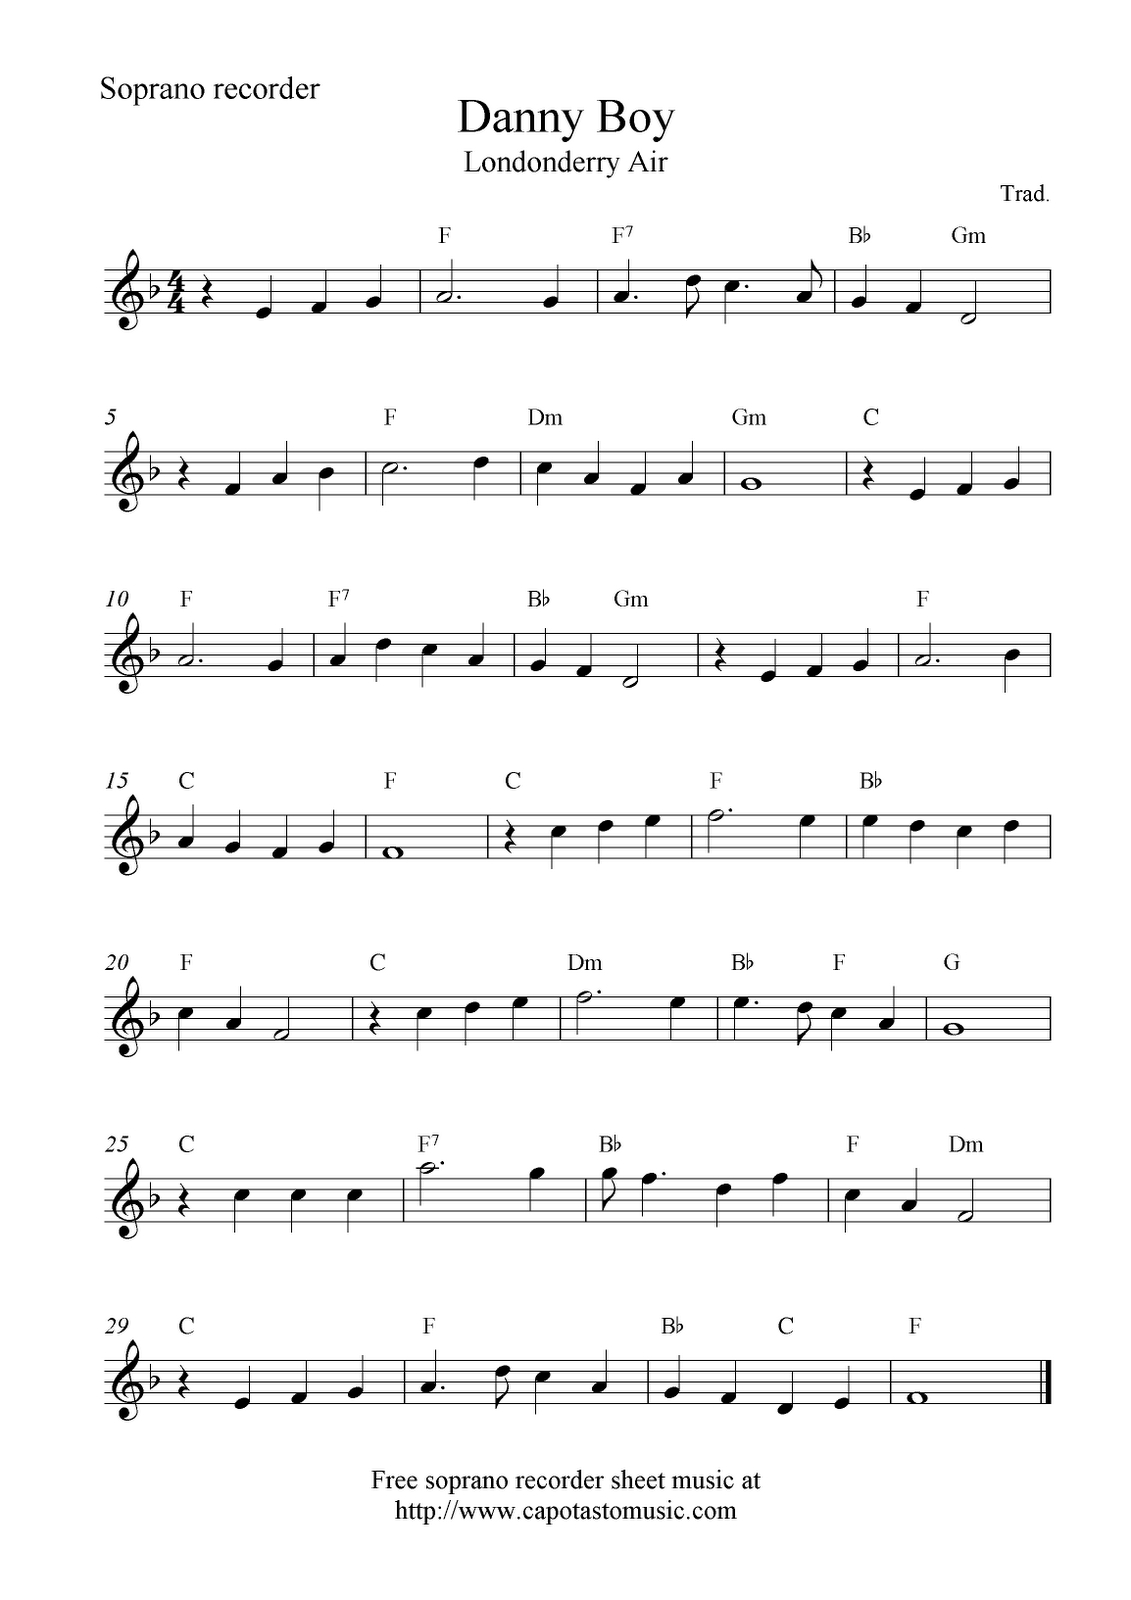 Danny Boy (Londonderry Air), Free Soprano Recorder Sheet Music Notes - Free Printable Recorder Sheet Music For Beginners